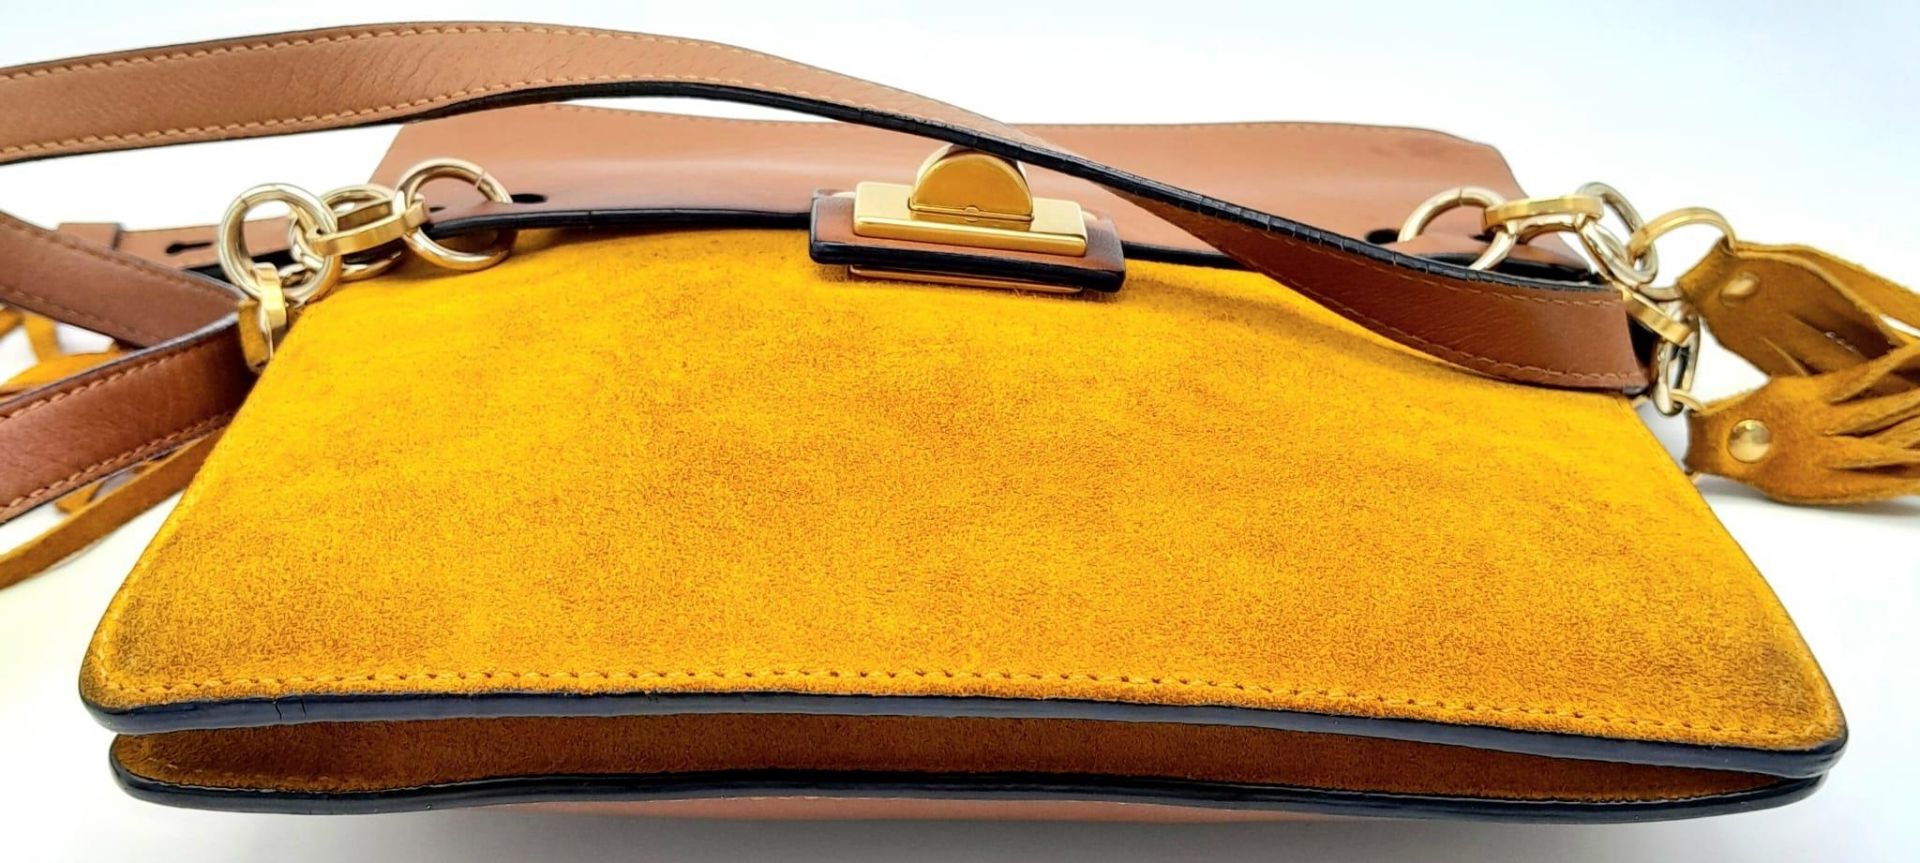 A Chloe Brown and Mustard 'Jane' Shoulder Bag. Leather and suede exterior with gold-toned - Image 5 of 8